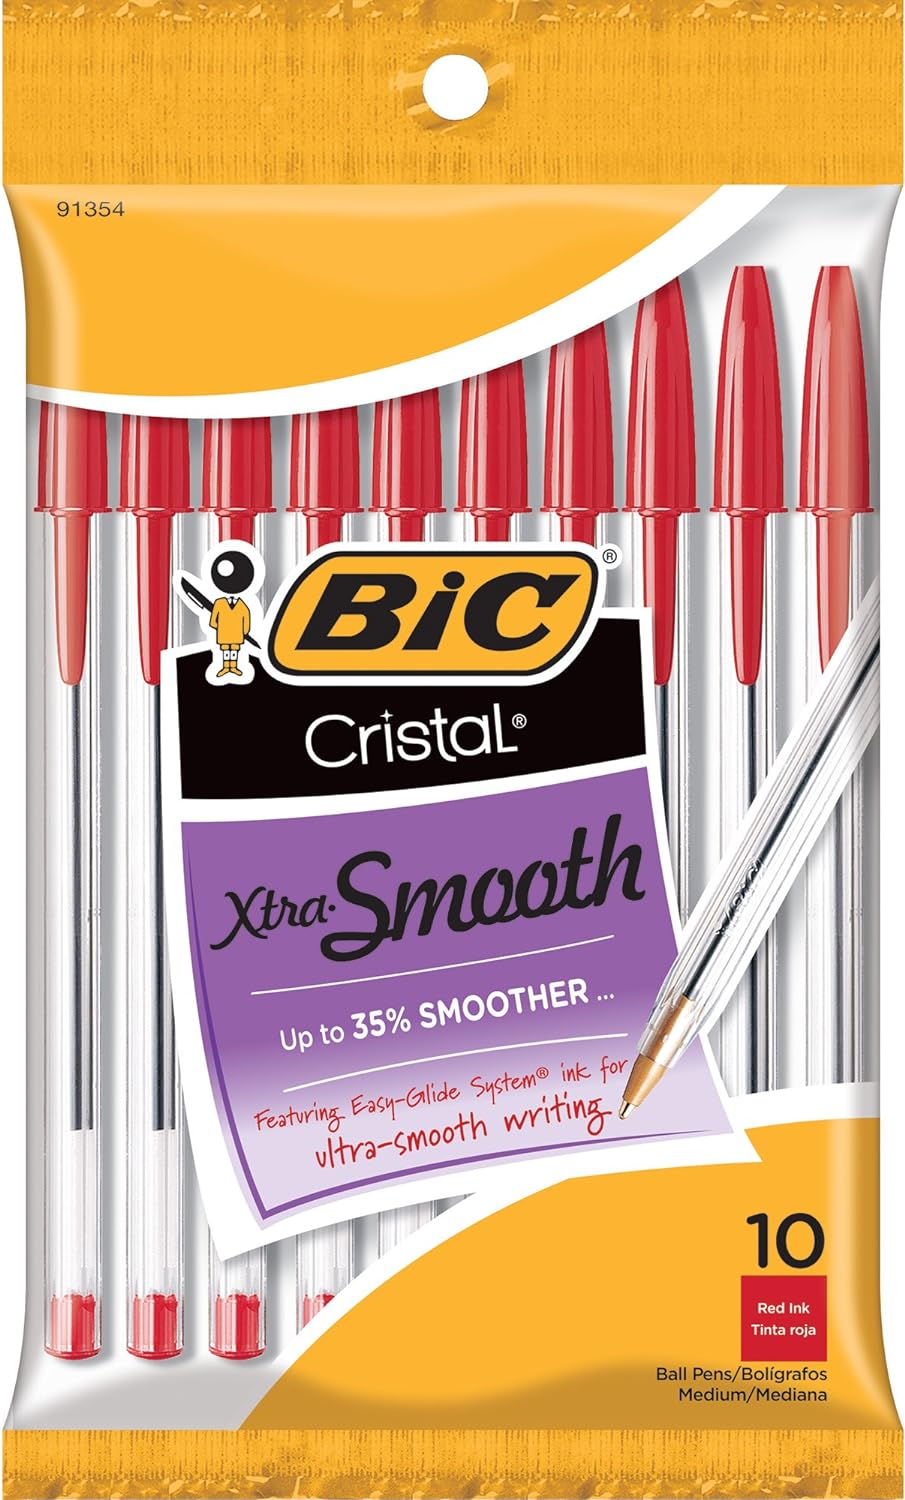 BIC Cristal Xtra Smooth Ballpoint Pen, Medium Point (1.0mm), Red, 10-Count